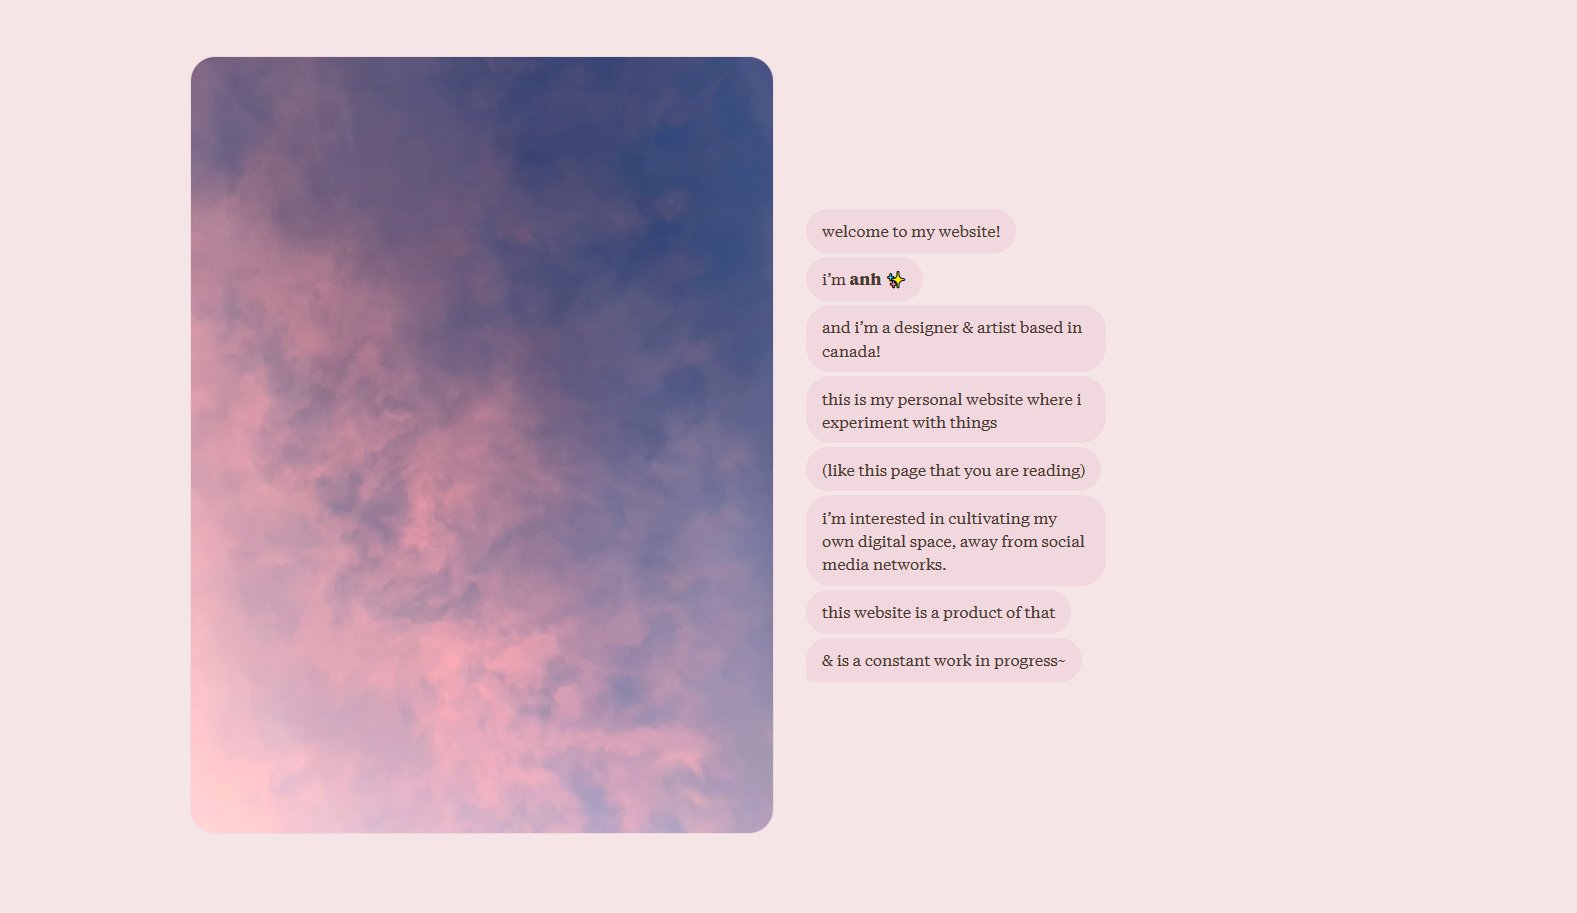 A photo of pink clouds. Next to it is a short bio where I introduce myself and my site, styled to look like text bubbles.